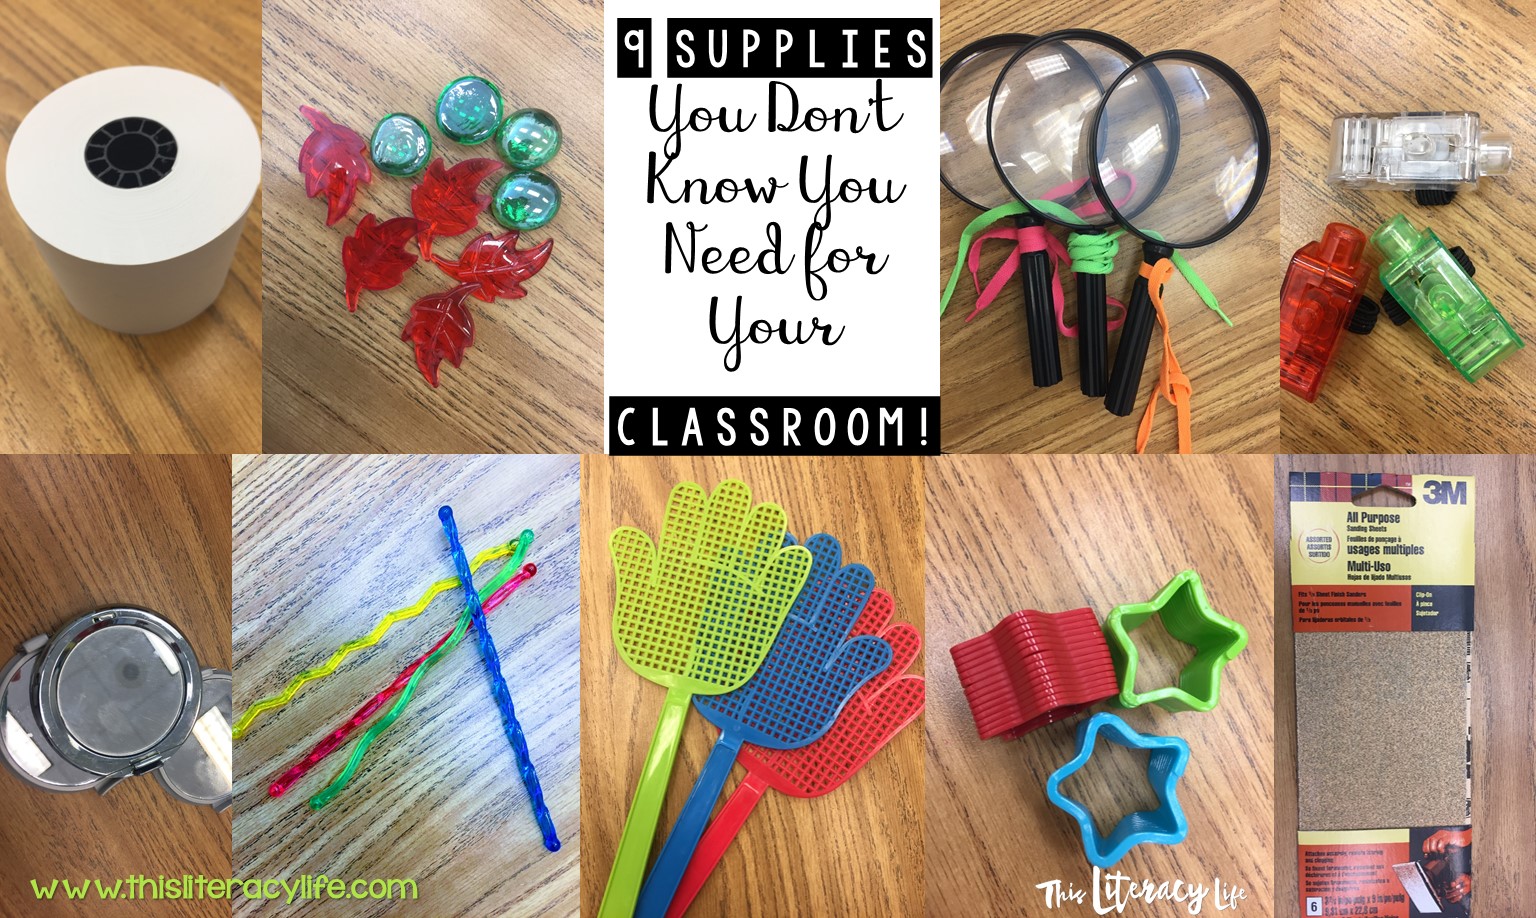 Buying school supplies is always fun, but these 9 supplies will change your classroom forever!